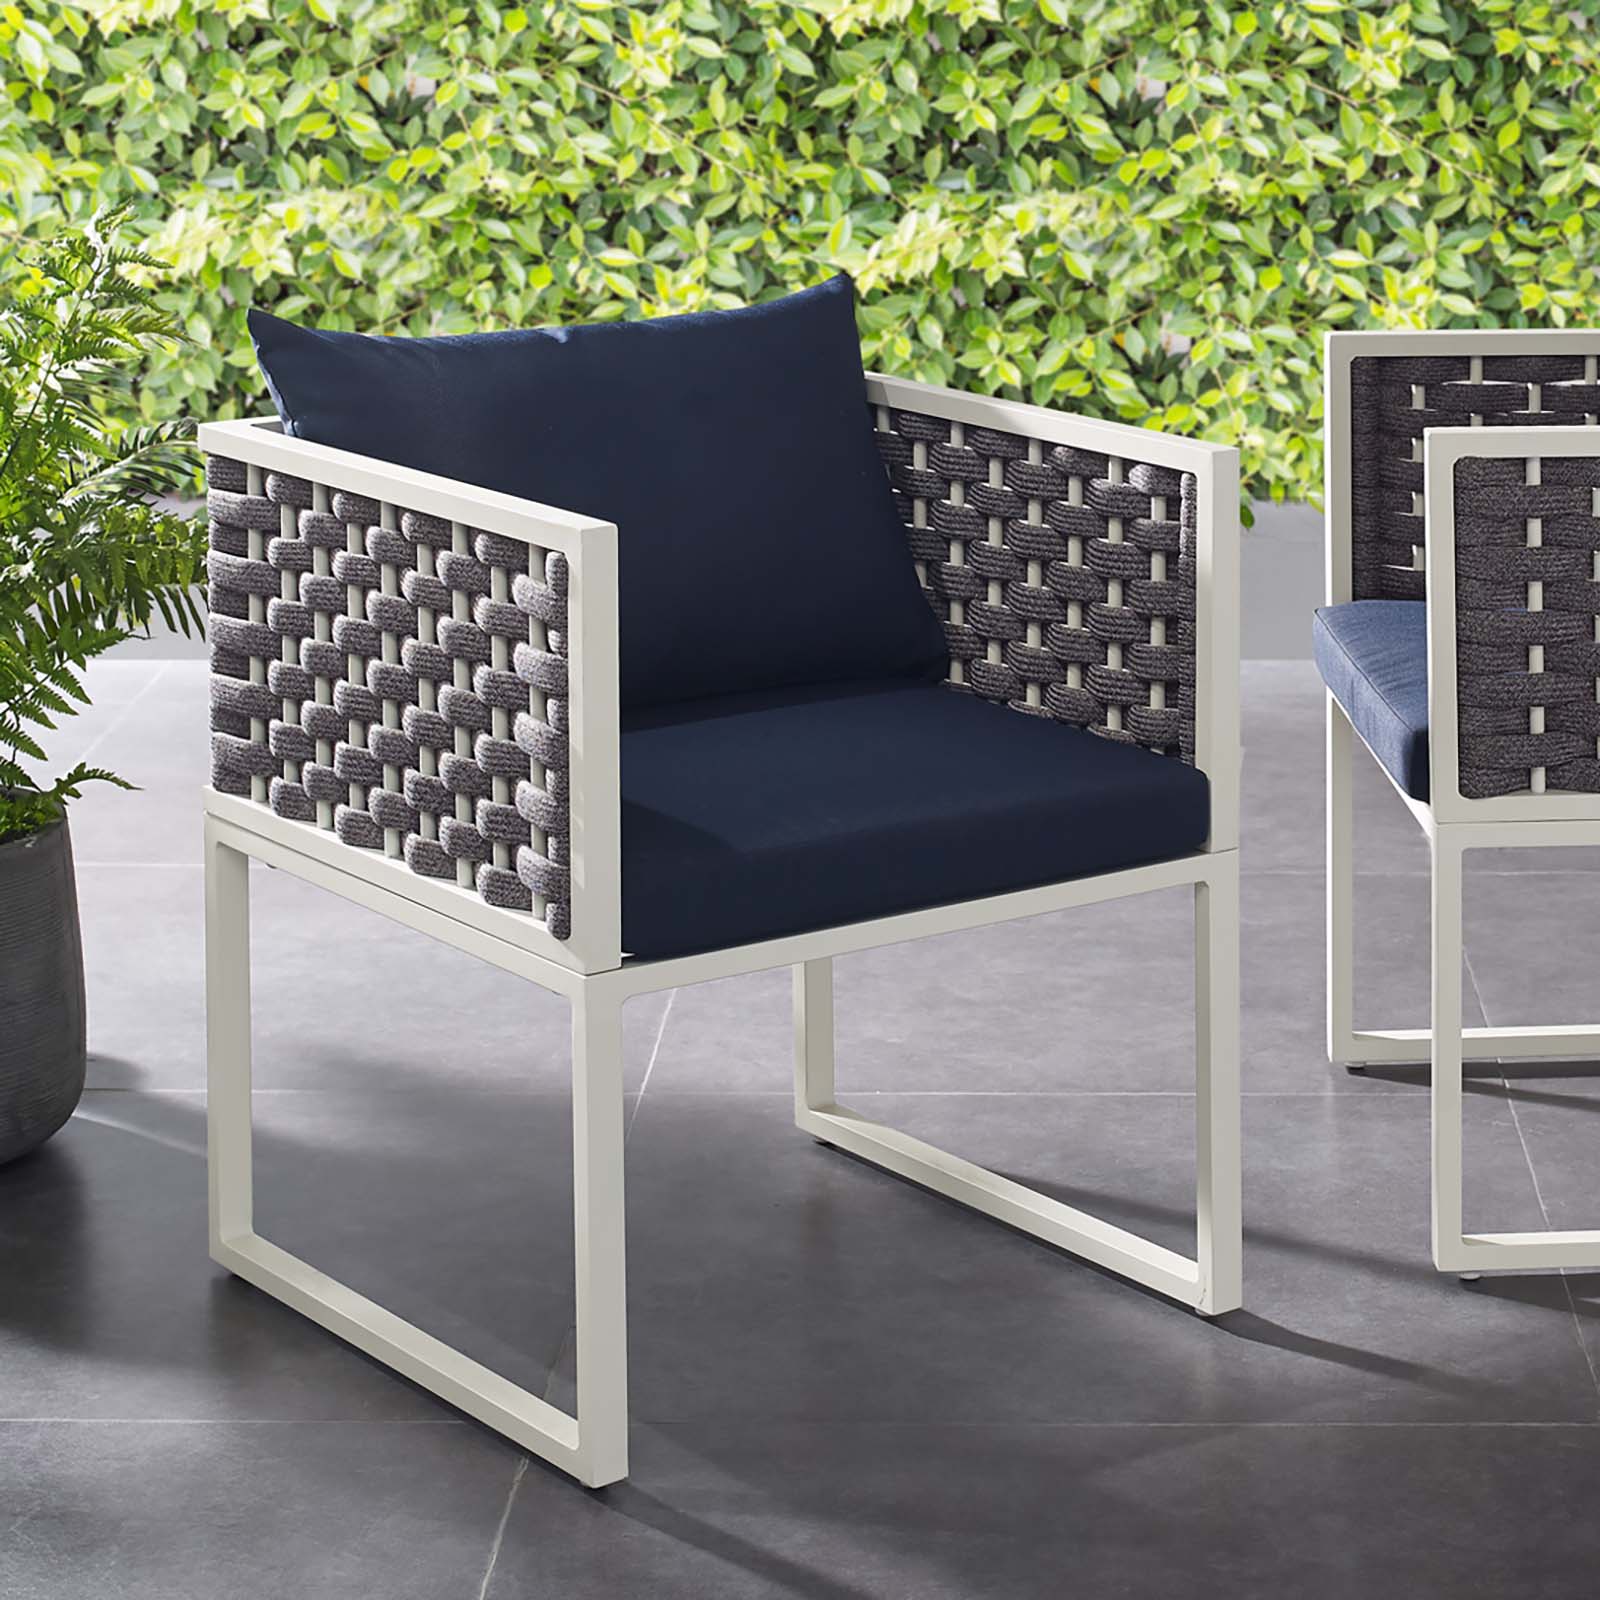 Modway Outdoor Dining Chairs - Stance Outdoor Patio Aluminum Dining Armchair White Navy